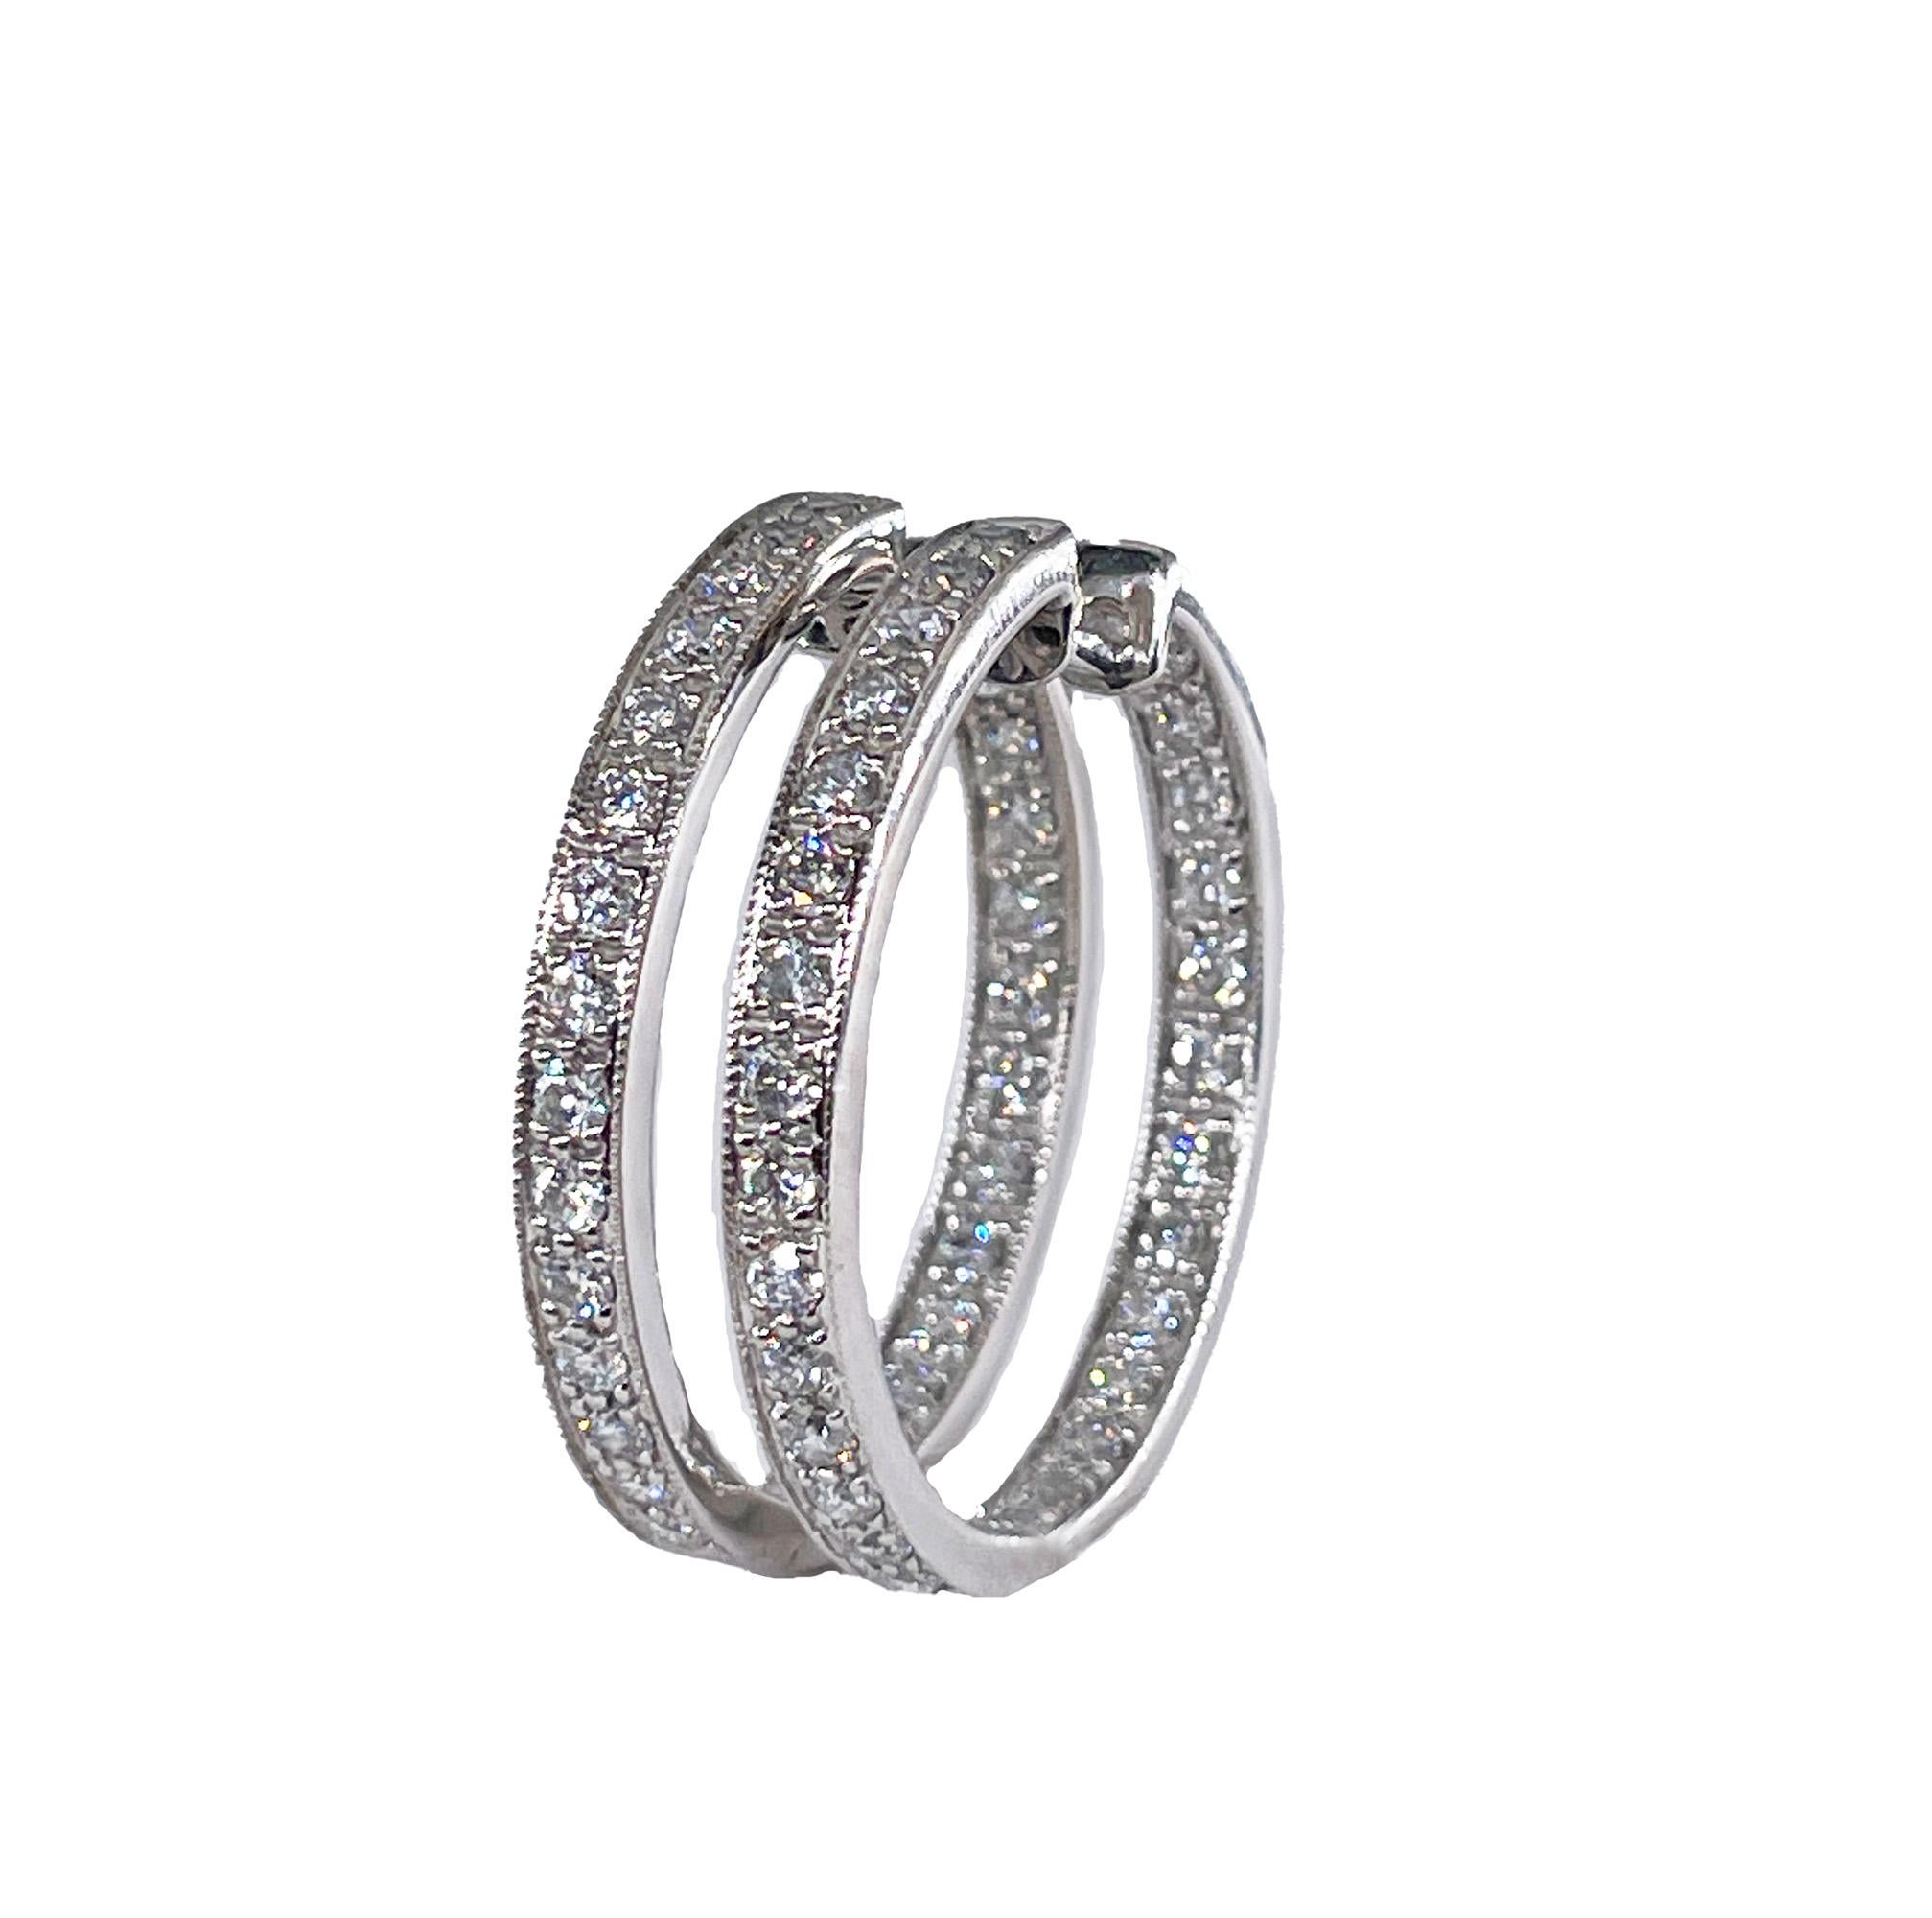 Inside Out Estate Round Pave 3.0ctw Diamond 14k White Gold 30mm Hoop Earrings In Excellent Condition For Sale In New York, NY